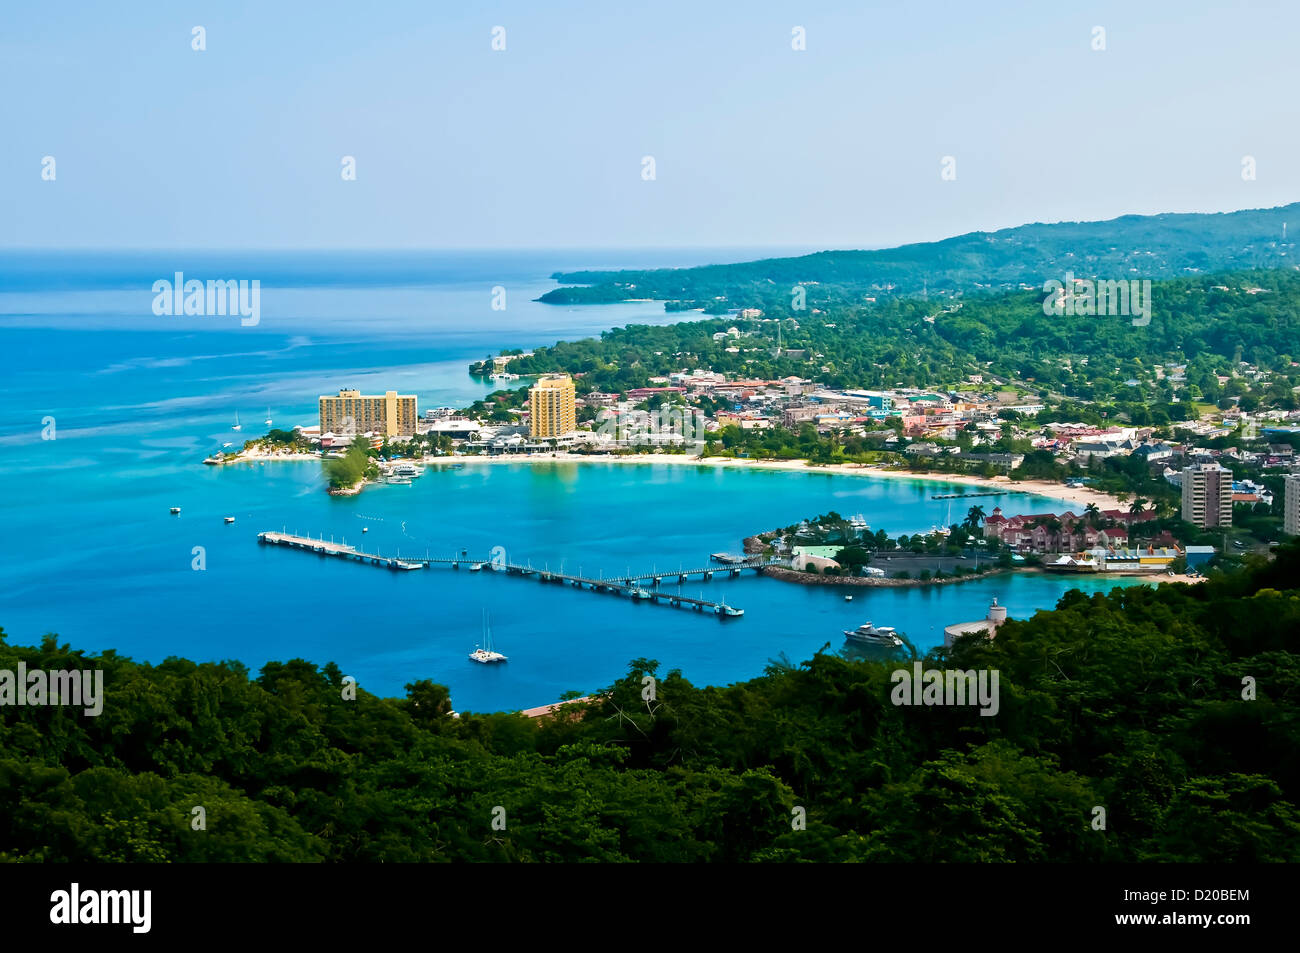 Aerial overview of the city of Ocho Rios showing hotels and beach Ocho Rios Jamaica Stock Photo